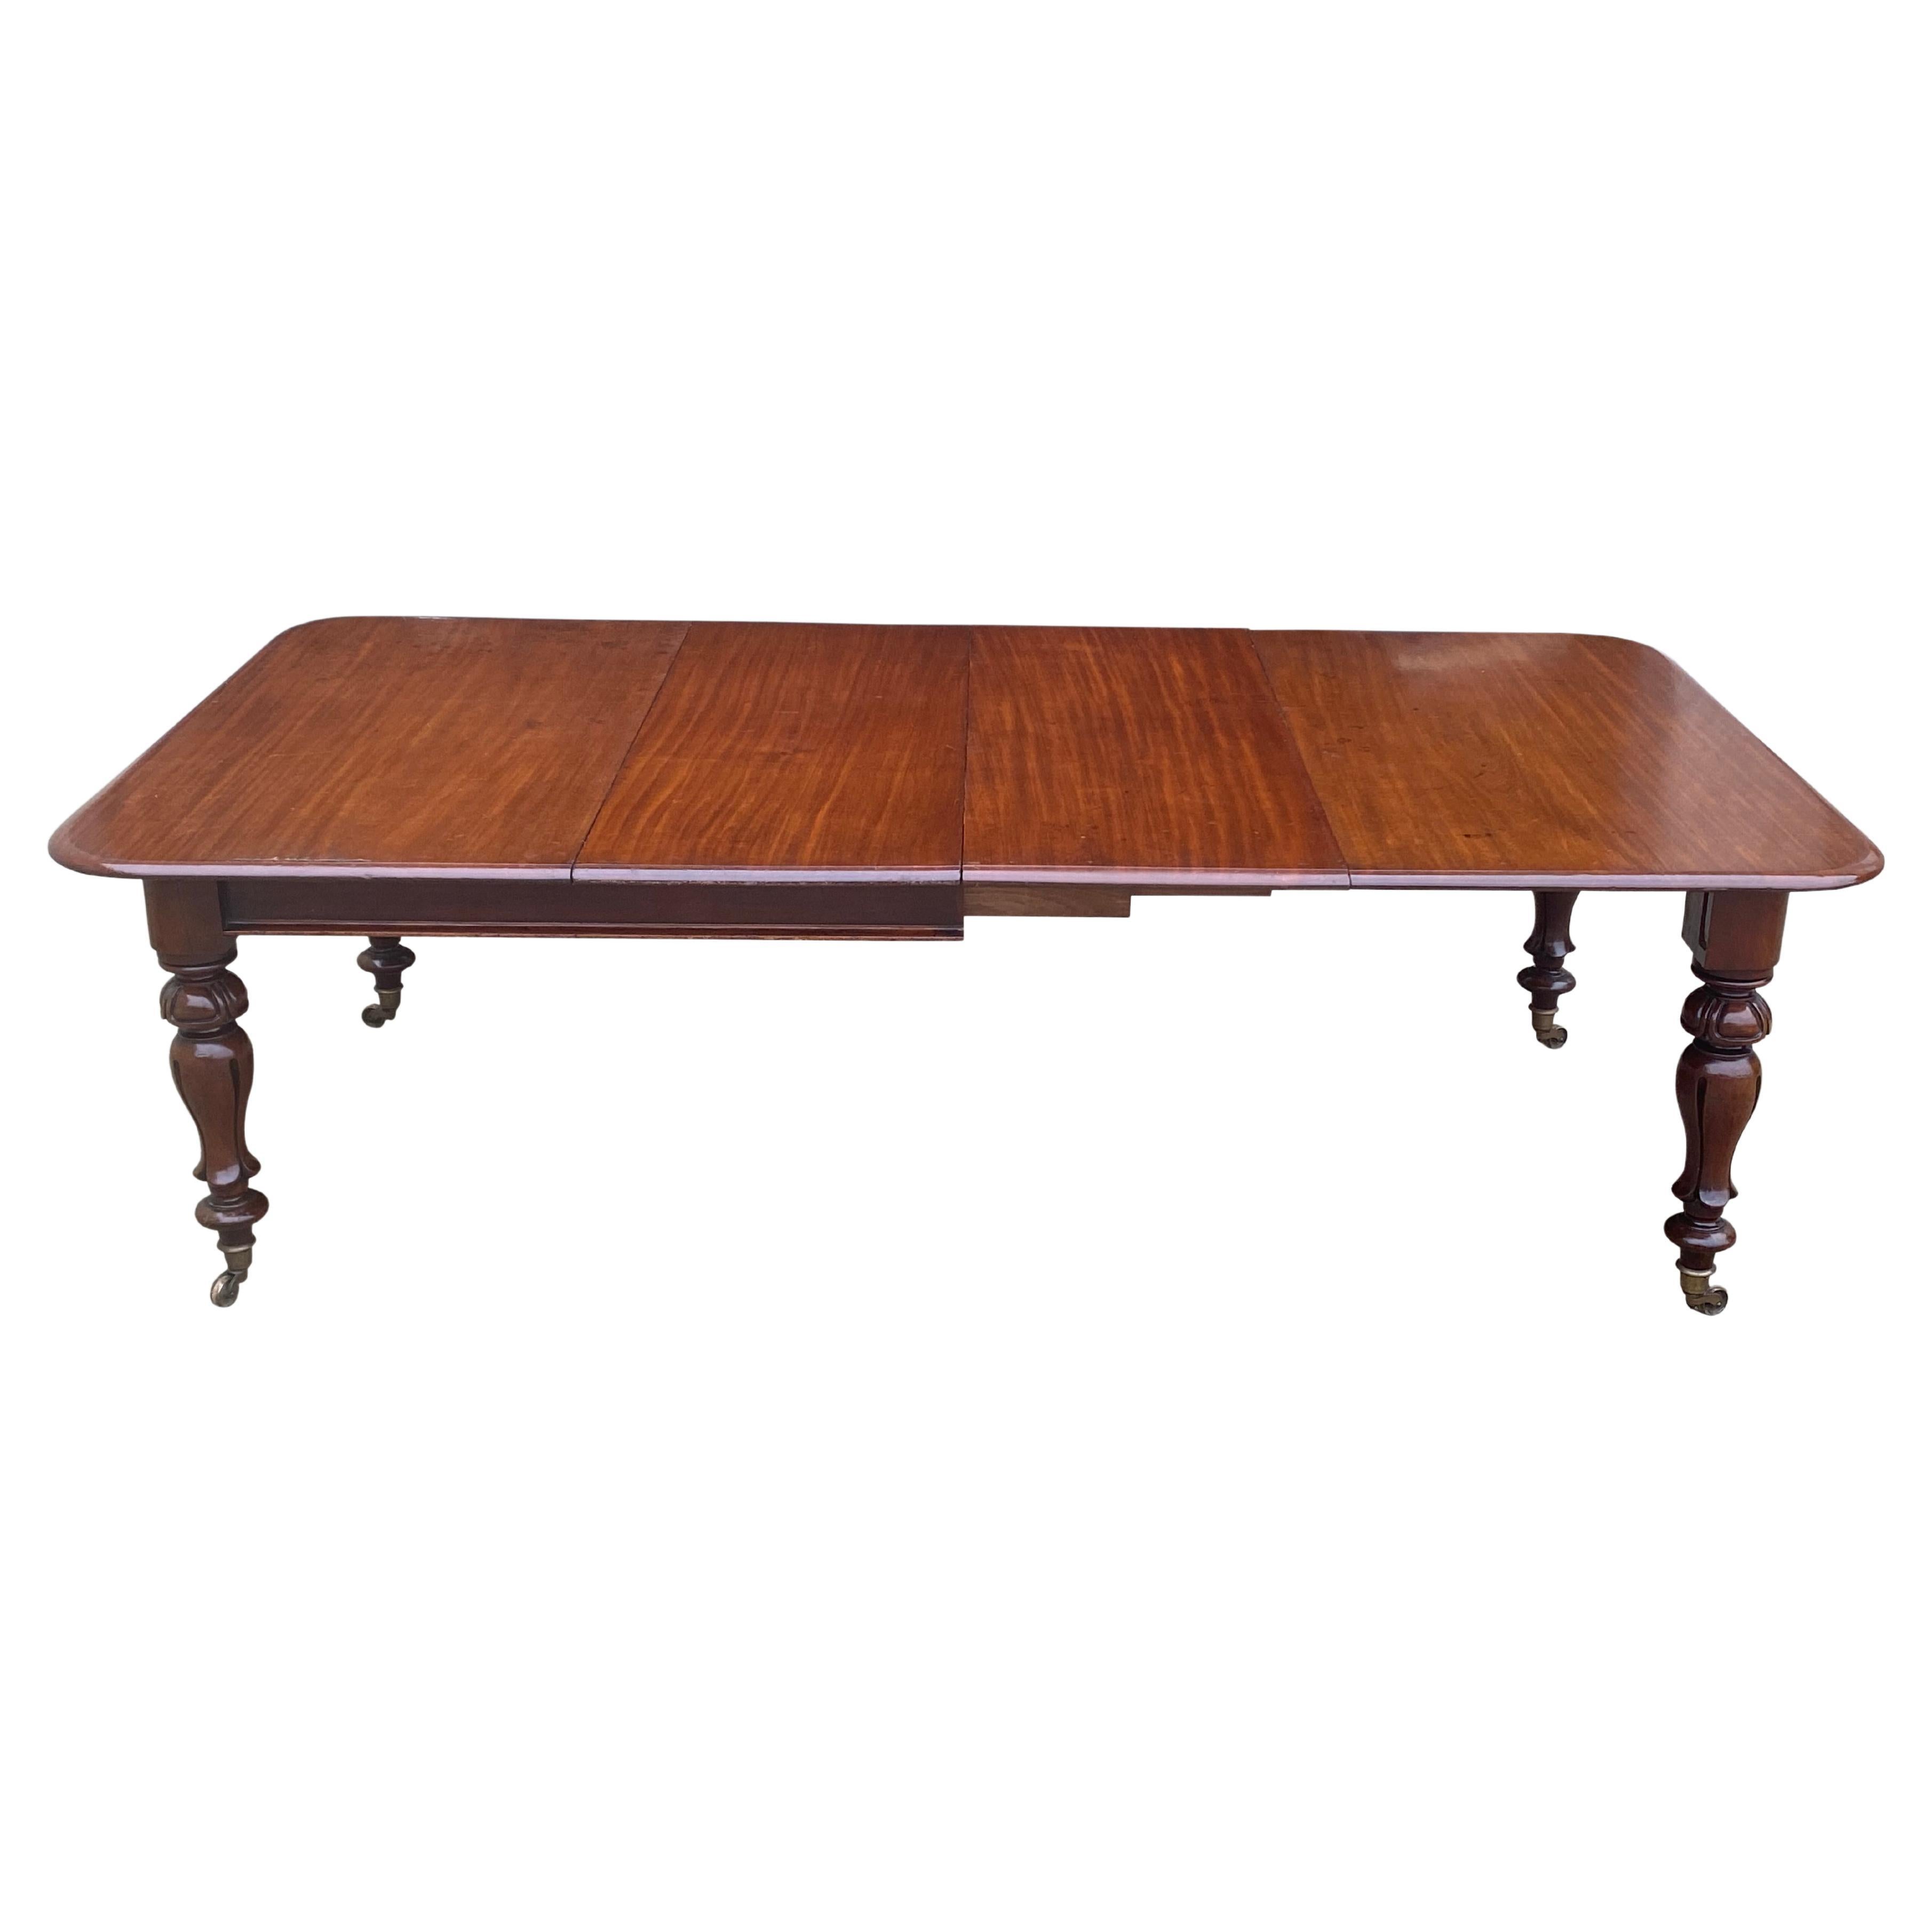 19th Century William IV Period Mahogany Dining Table For Sale